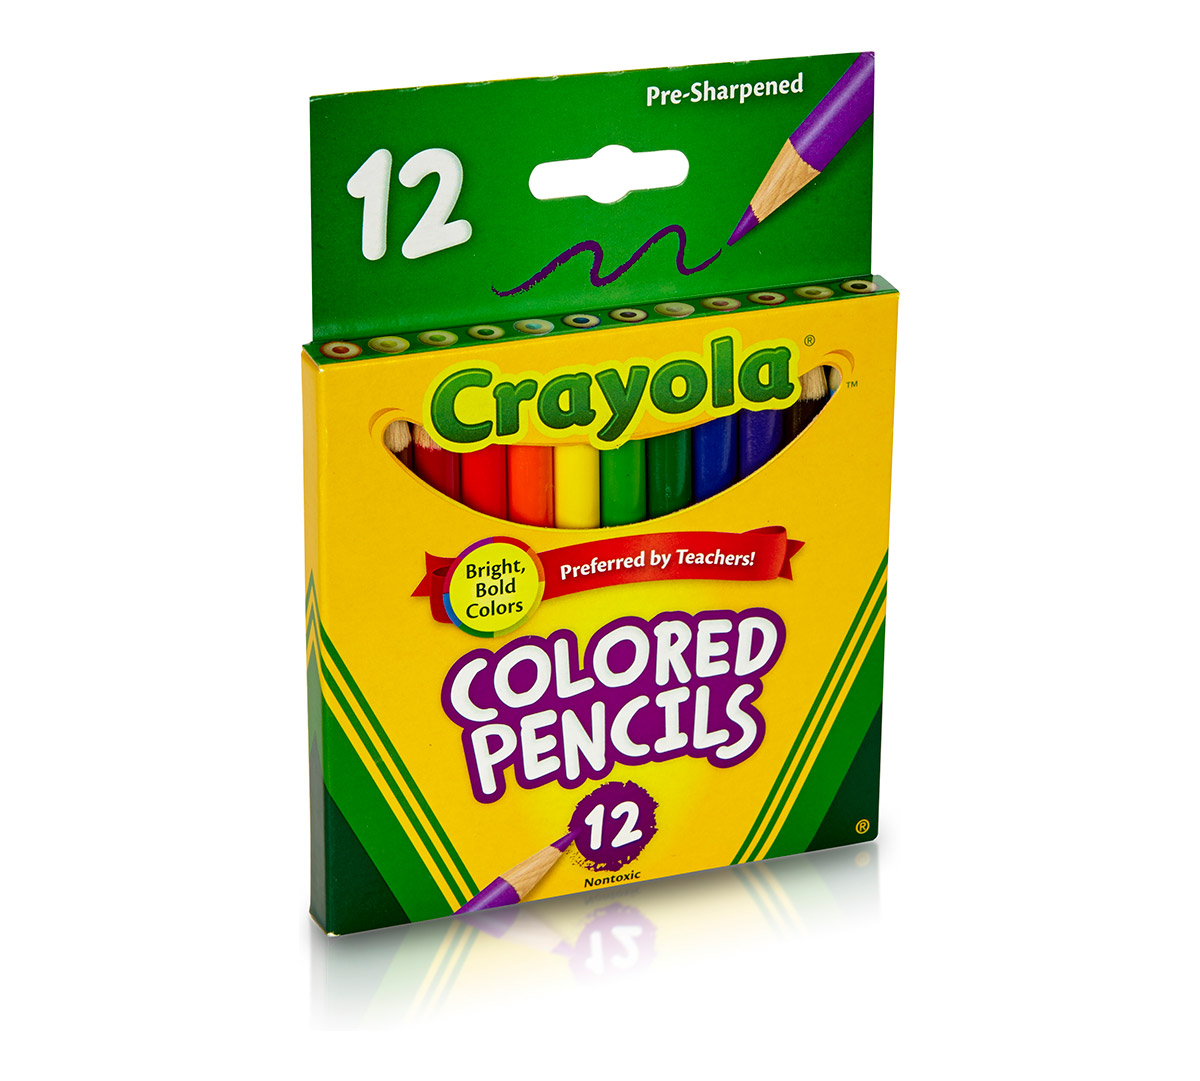 Download Crayola Colored Pencils, Assorted Colors, Pre-sharpened, Adult Coloring, 12 Count | Crayola